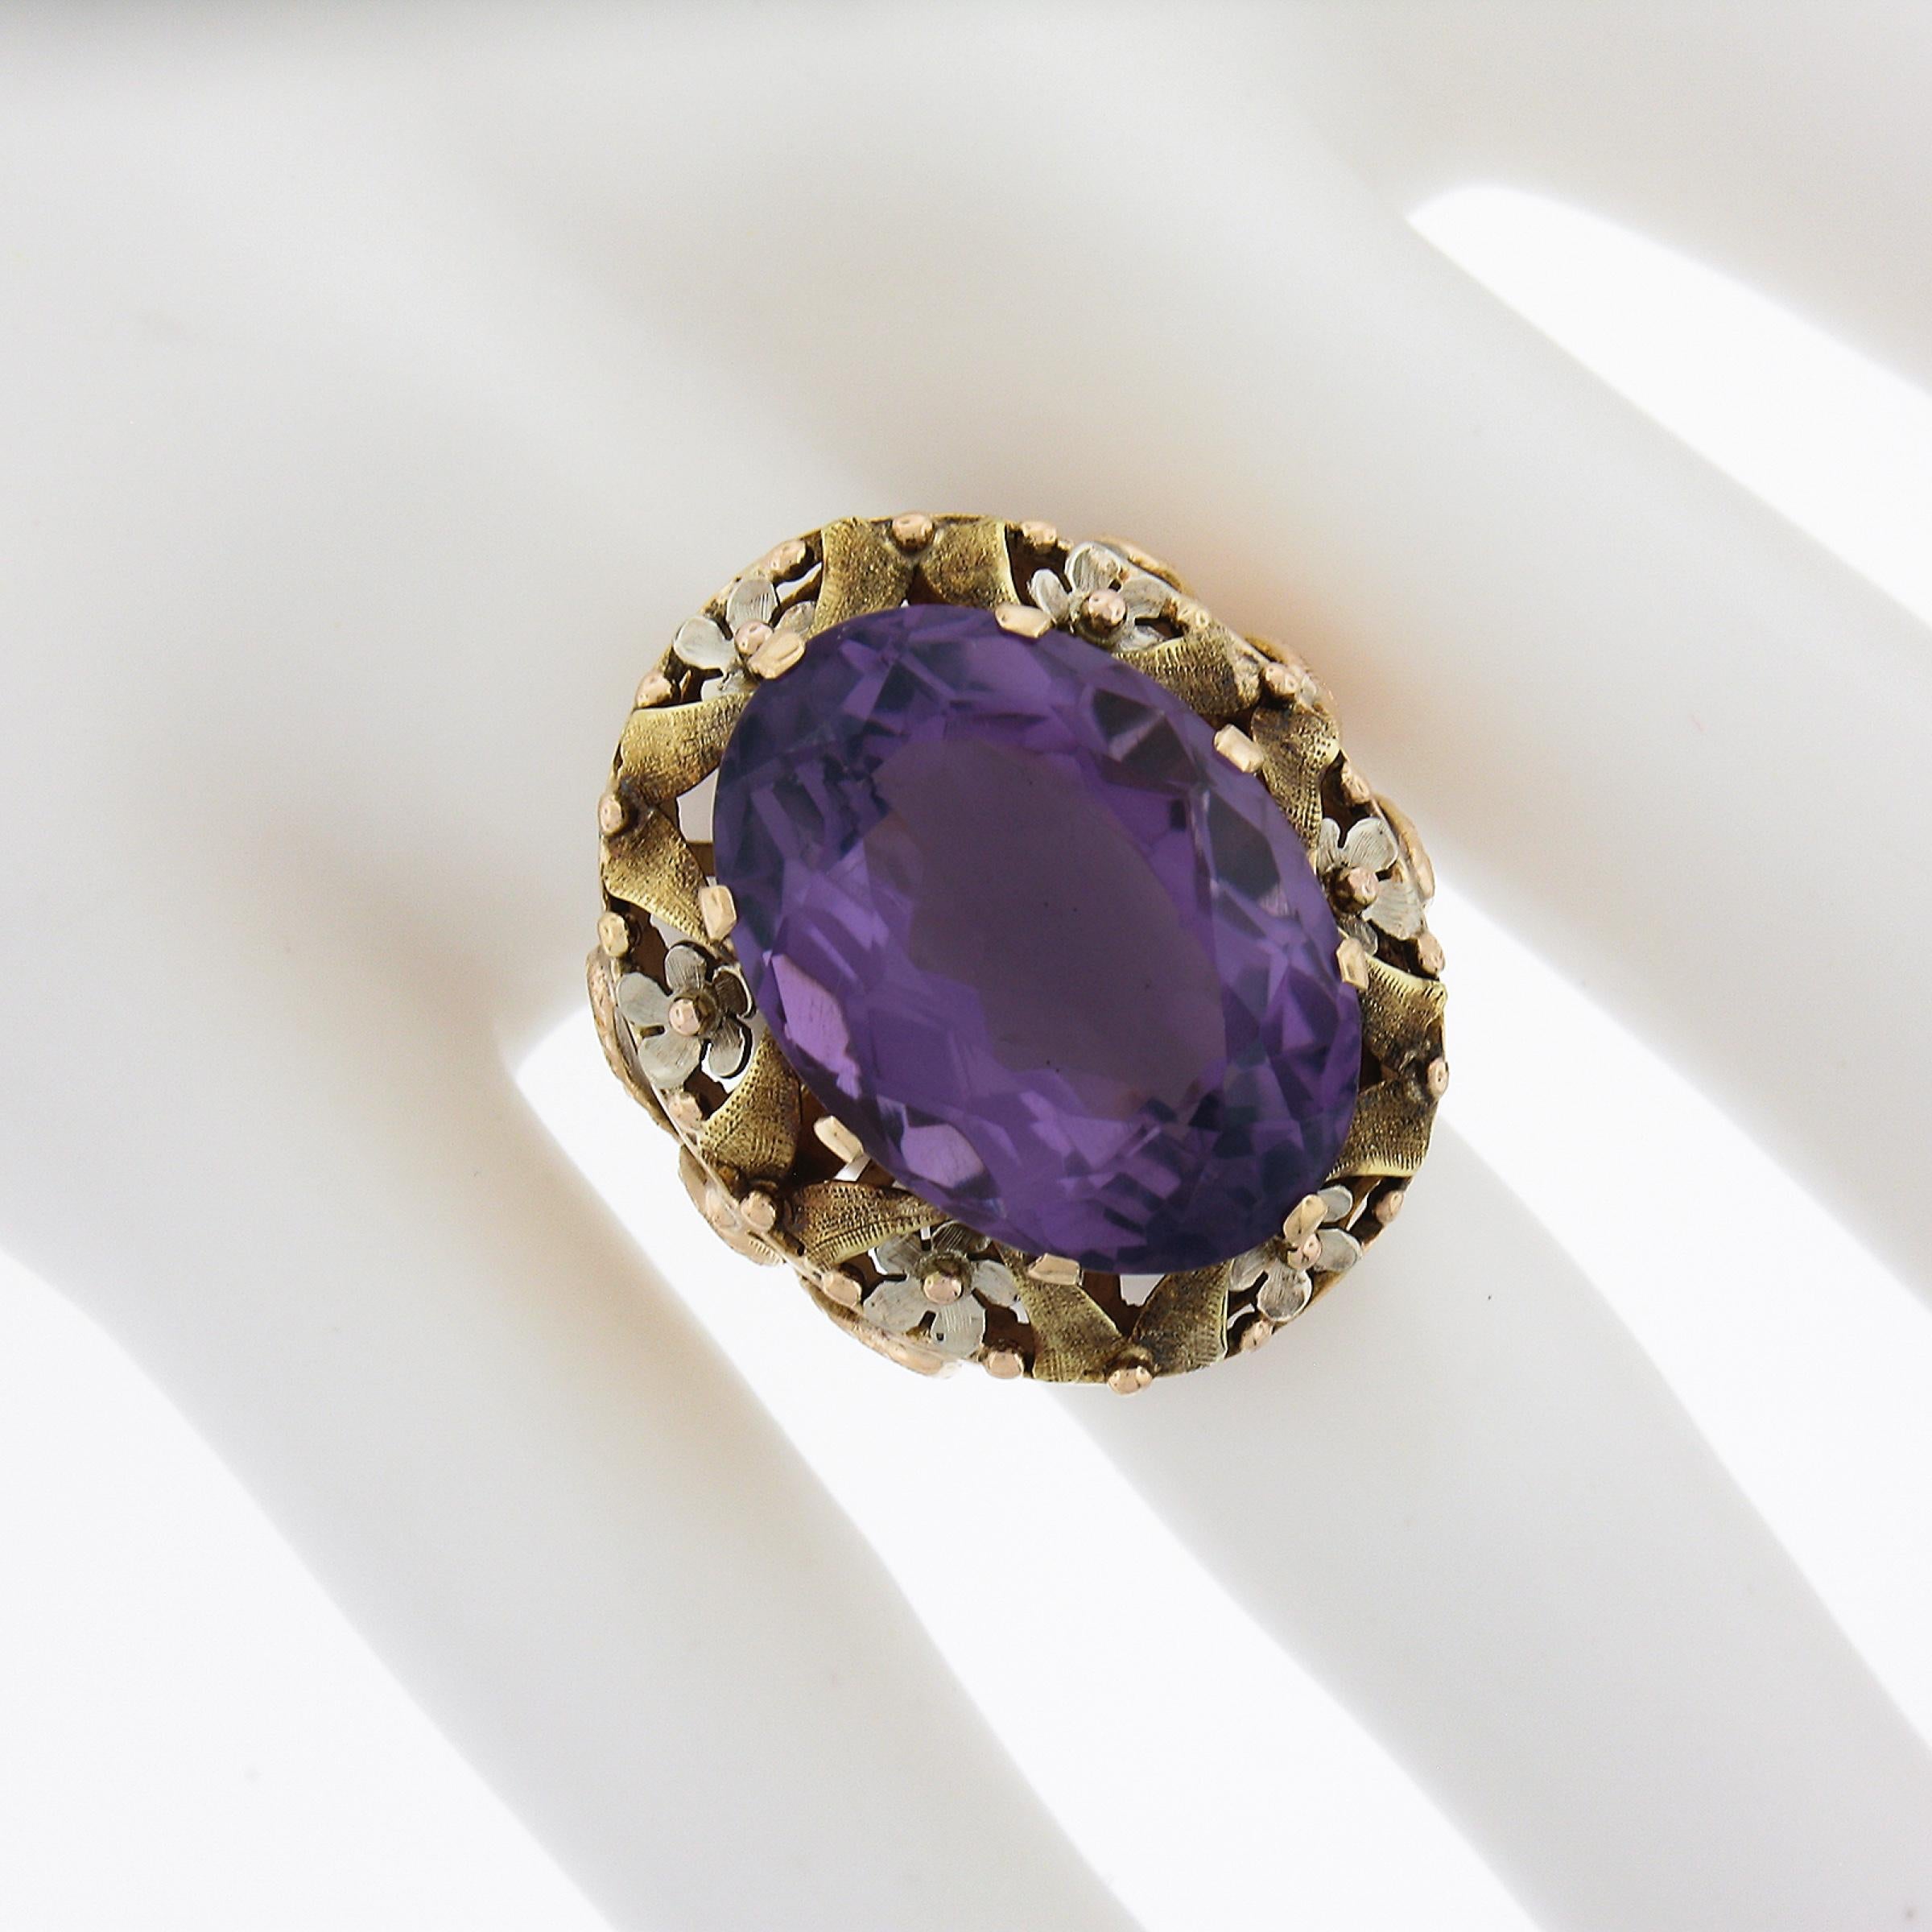 Vintage 14k Gold 16.3ct Oval Prong Amethyst Textured Floral Large Cocktail Ring In Excellent Condition For Sale In Montclair, NJ